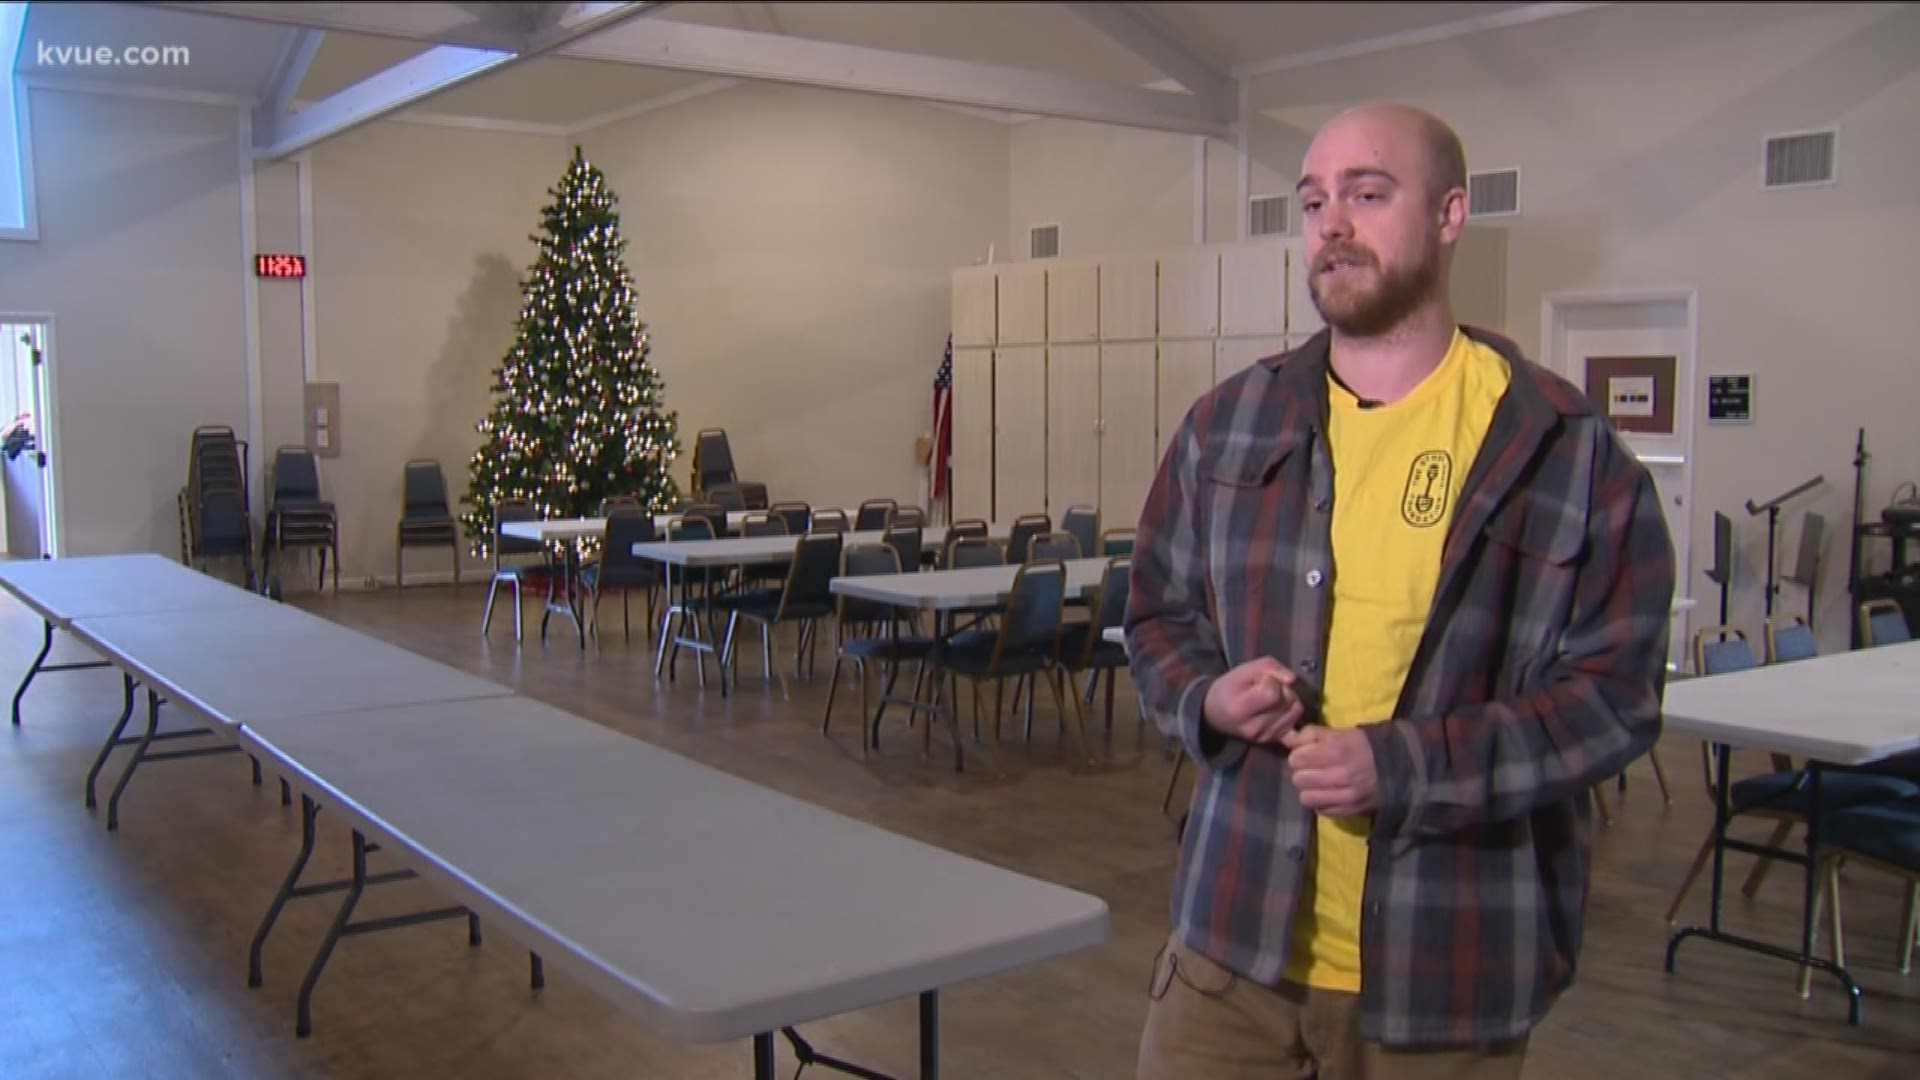 KVUE's Molly Oak takes us inside one church that will transform into a shelter.